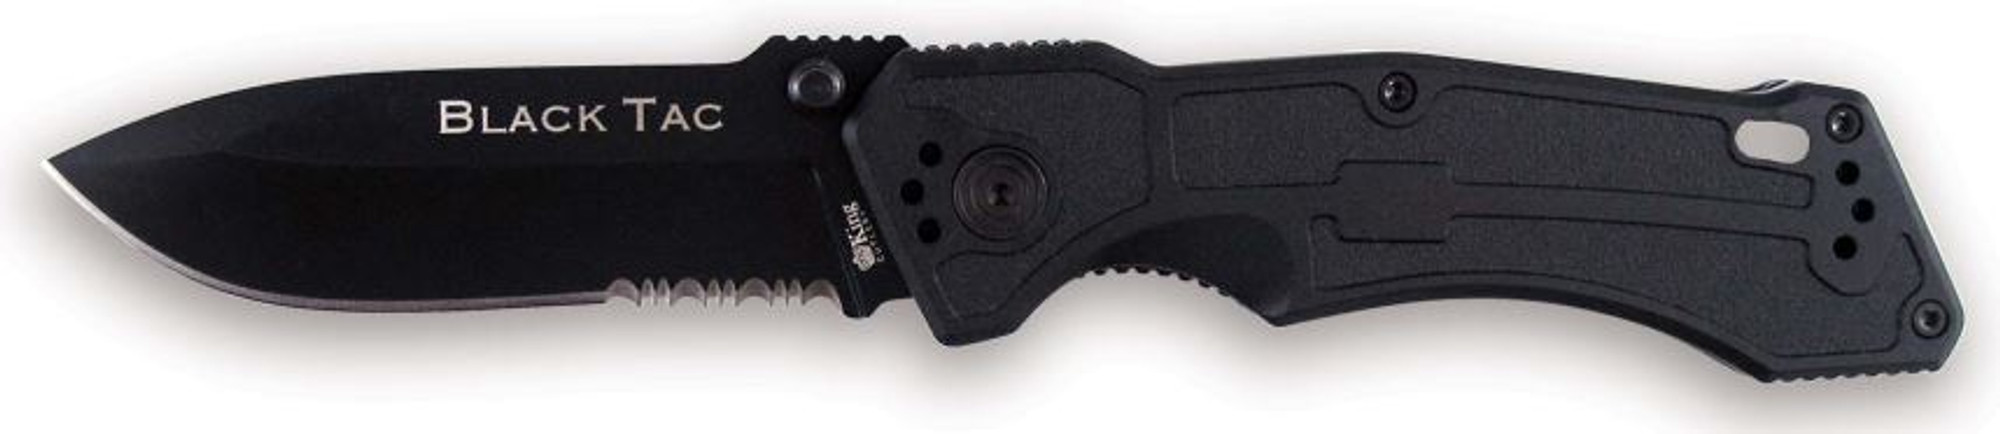 OKC 8793 King Cutlery Black Tac Partially Serated